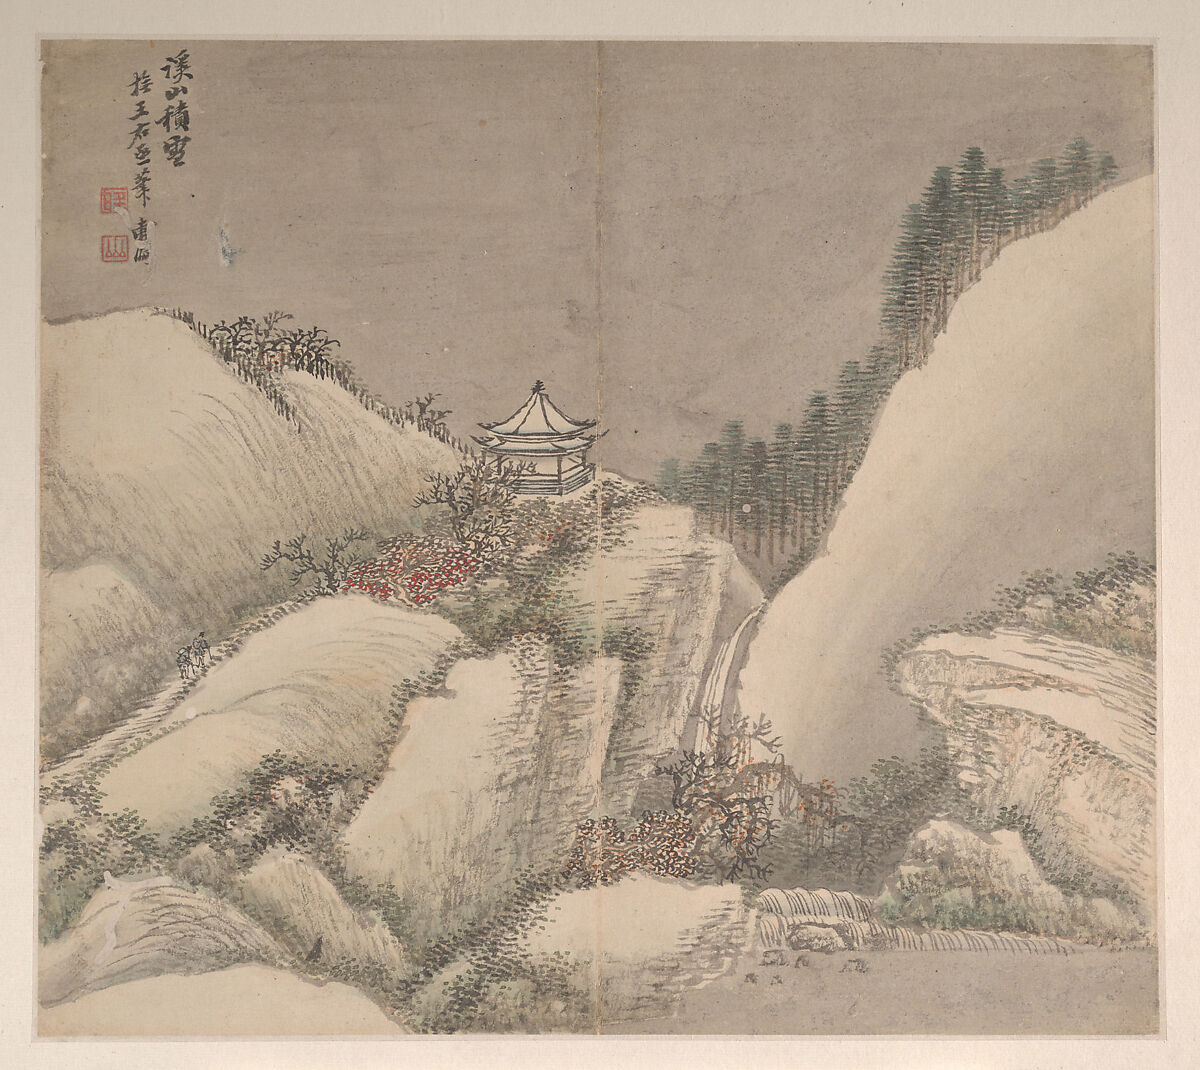 Landscapes in the Styles of Various Artists, Cao Jian (Chinese, active early 18th century), Album of twelve leaves; ink and color on paper, China 